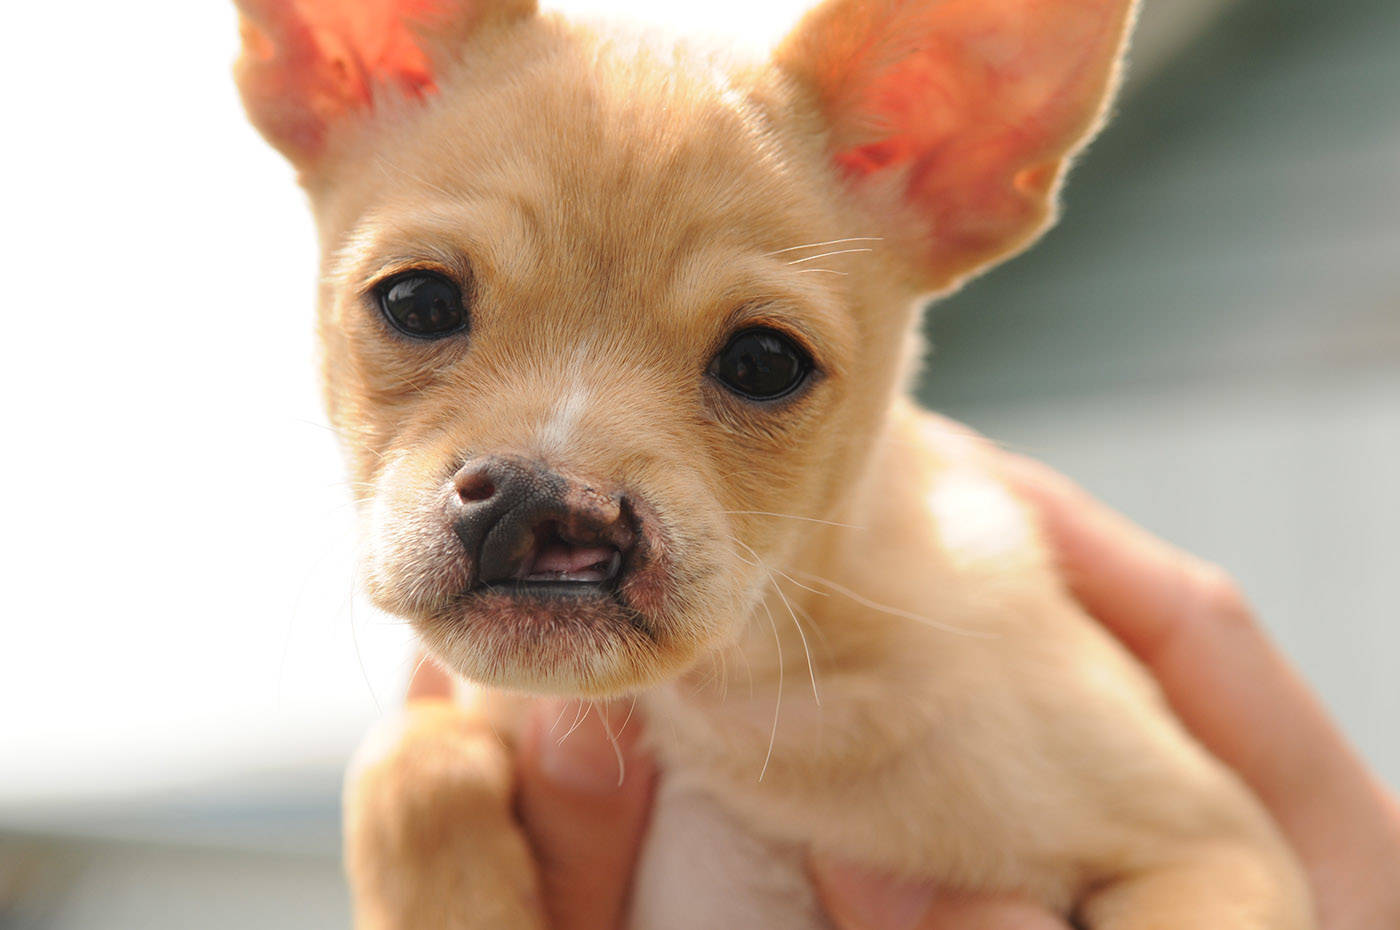 Baby Snoot is a chihuahua cross who was born with a cleft palate. He is seen here at the Chilliwack SPCA on Thursday, June 3, 2021. (Jenna Hauck/ Chilliwack Progress)